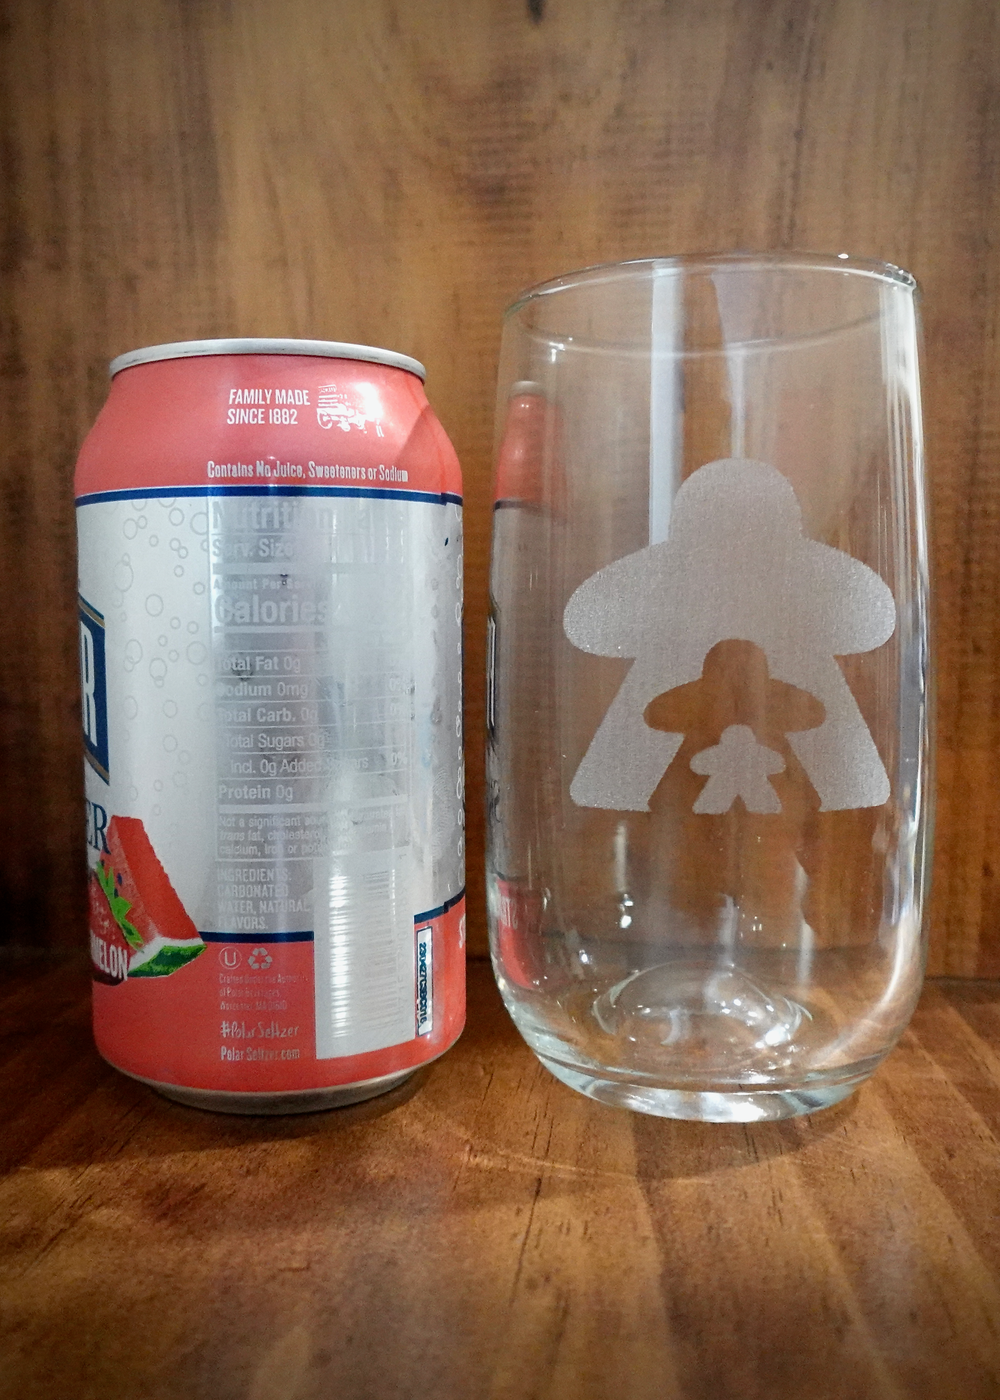 A photo of a drinking glass next to a soda can against a wooden background. The drinking glass features a frosted design of three person-shapes of different sizes.